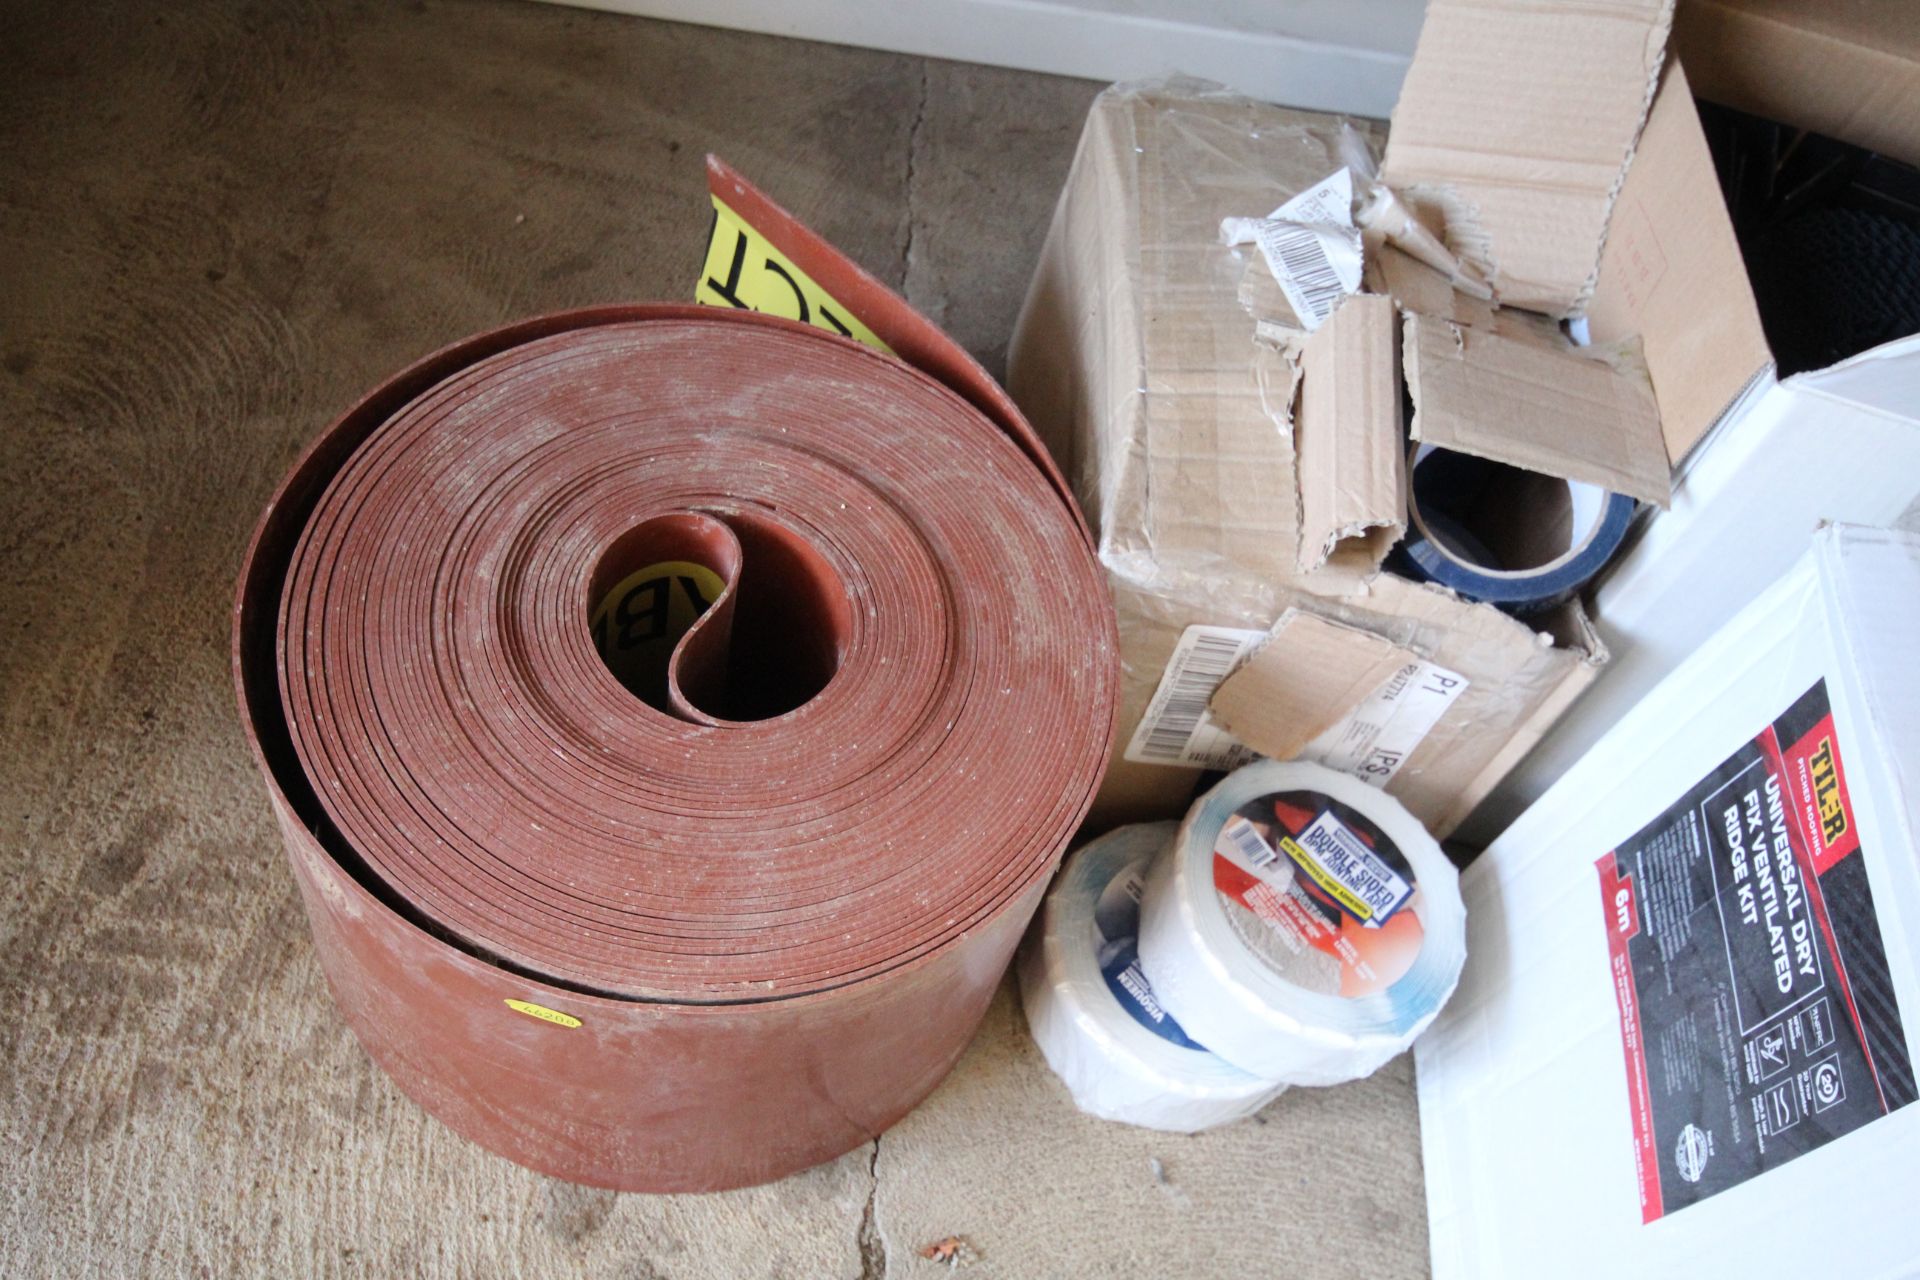 2x rolls of insulation; 2x rolls of carpet protector (25m), 2x boxes of Universal Dry Fix ventilated - Image 2 of 4